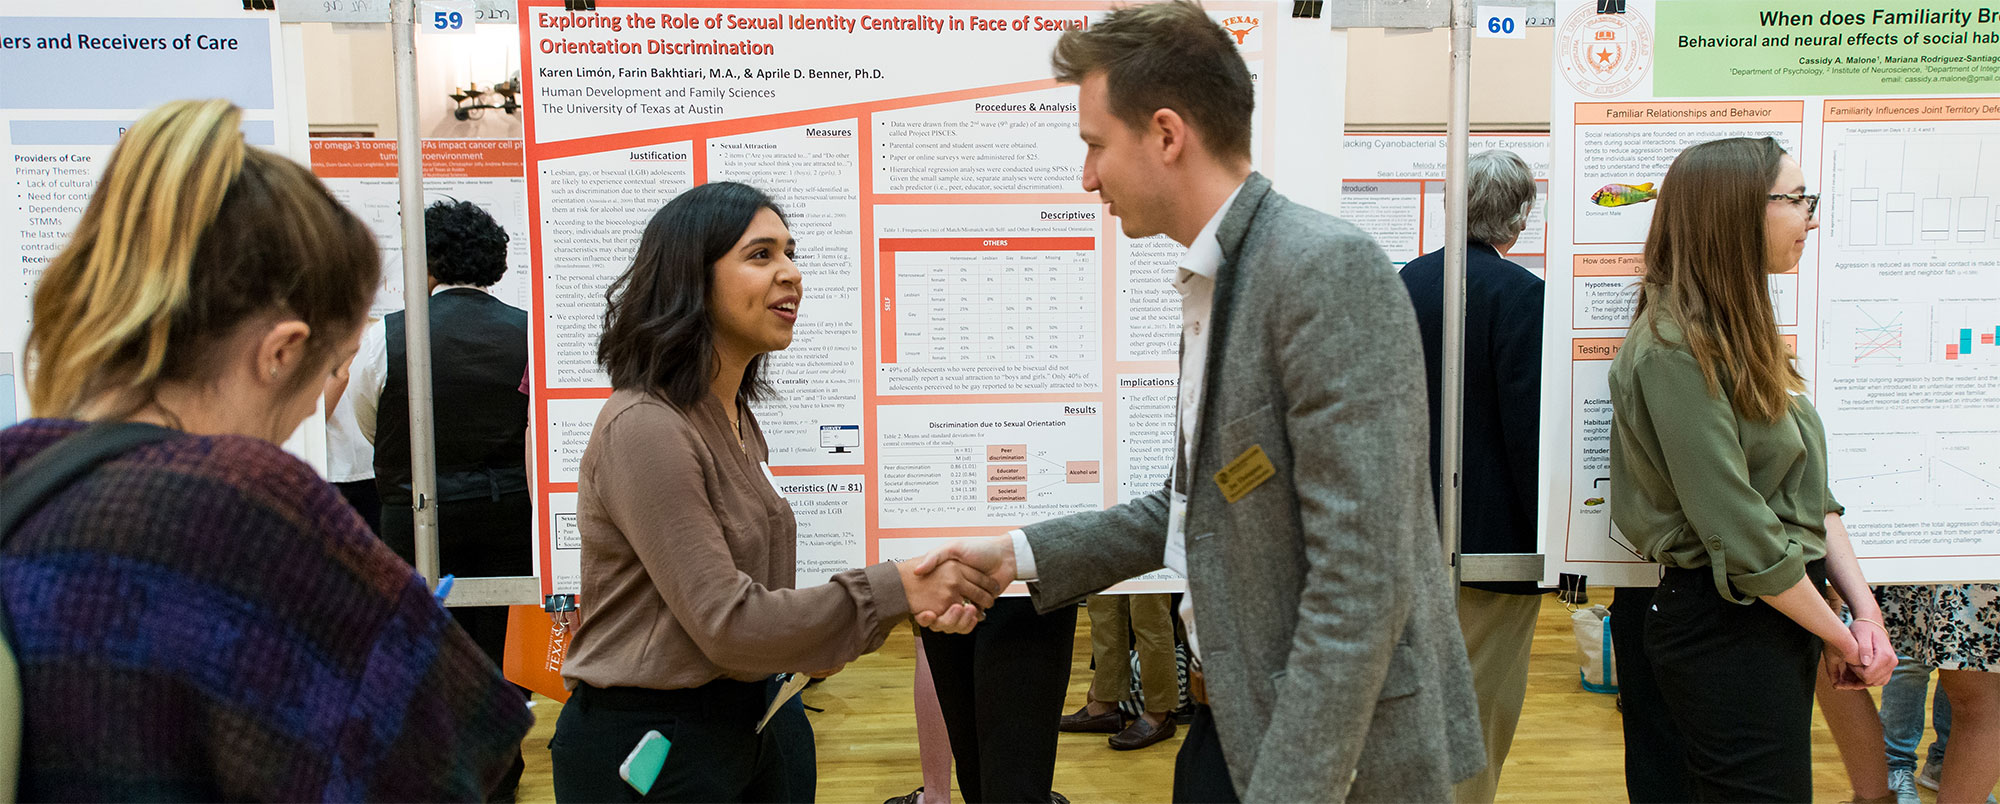 Woman and man shaking hands in front of research poster